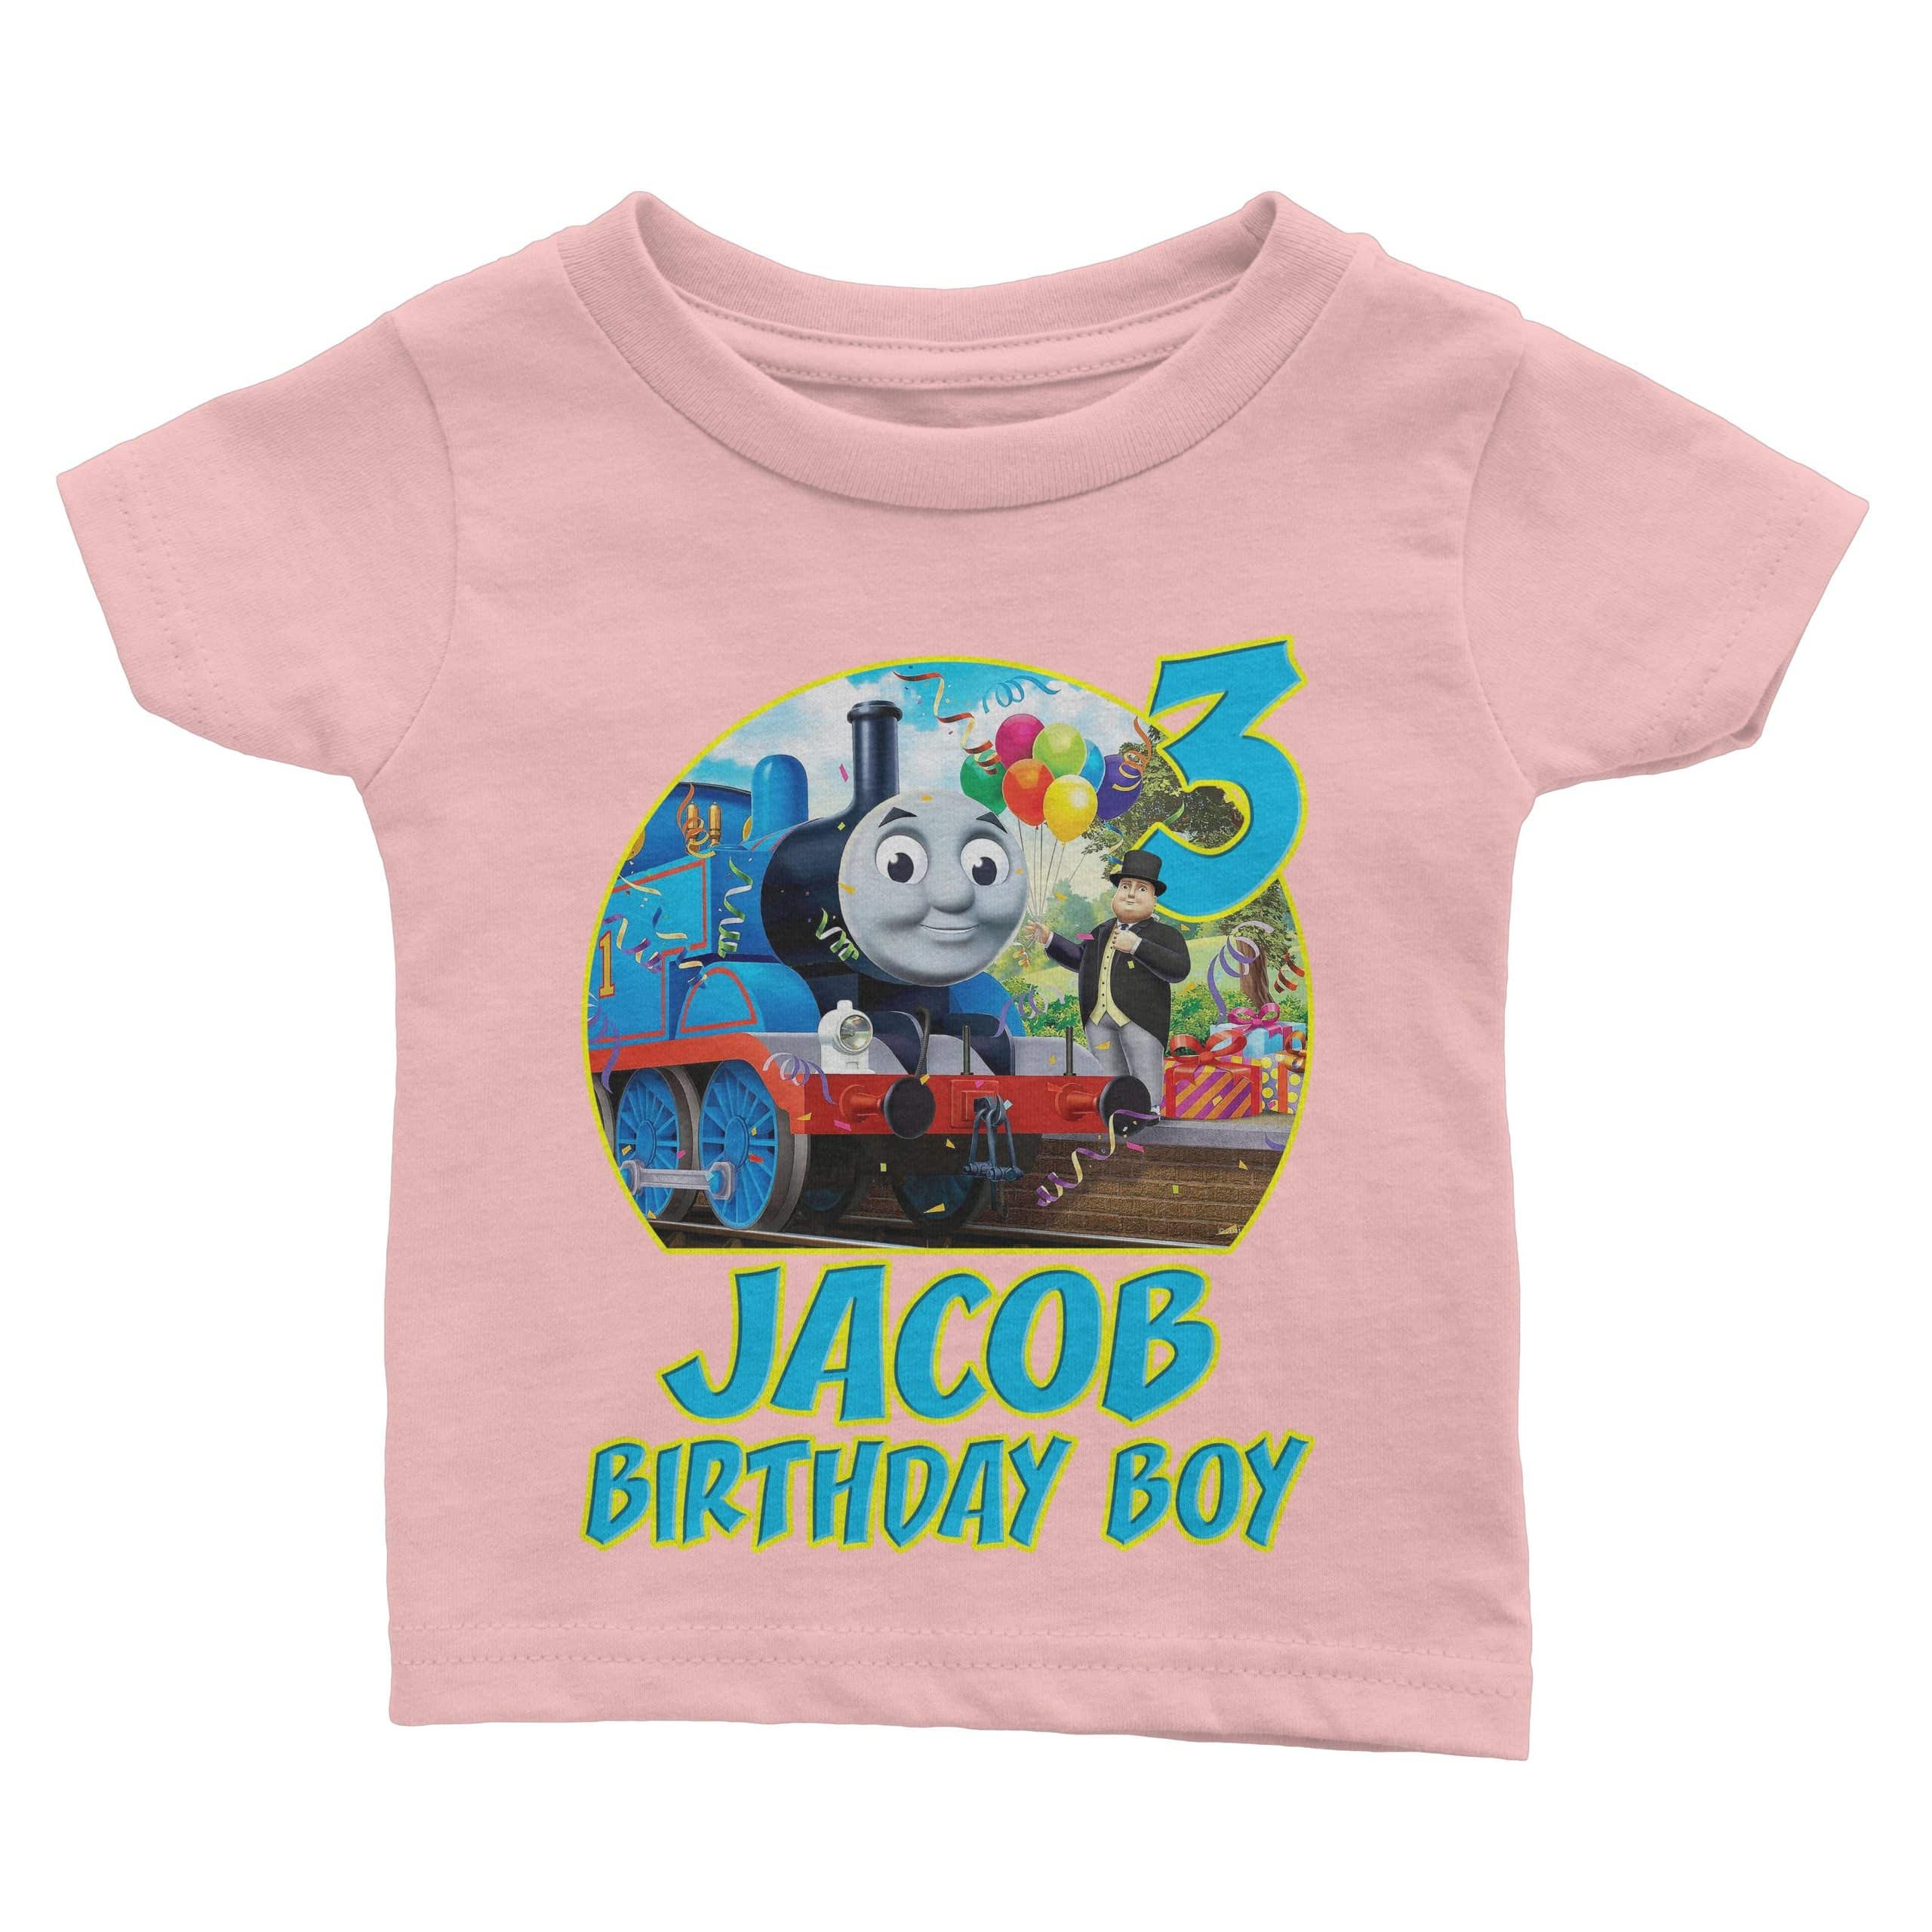 Thomas the Train Personalized Custom T Shirt Party Favor Birthday Gift Present